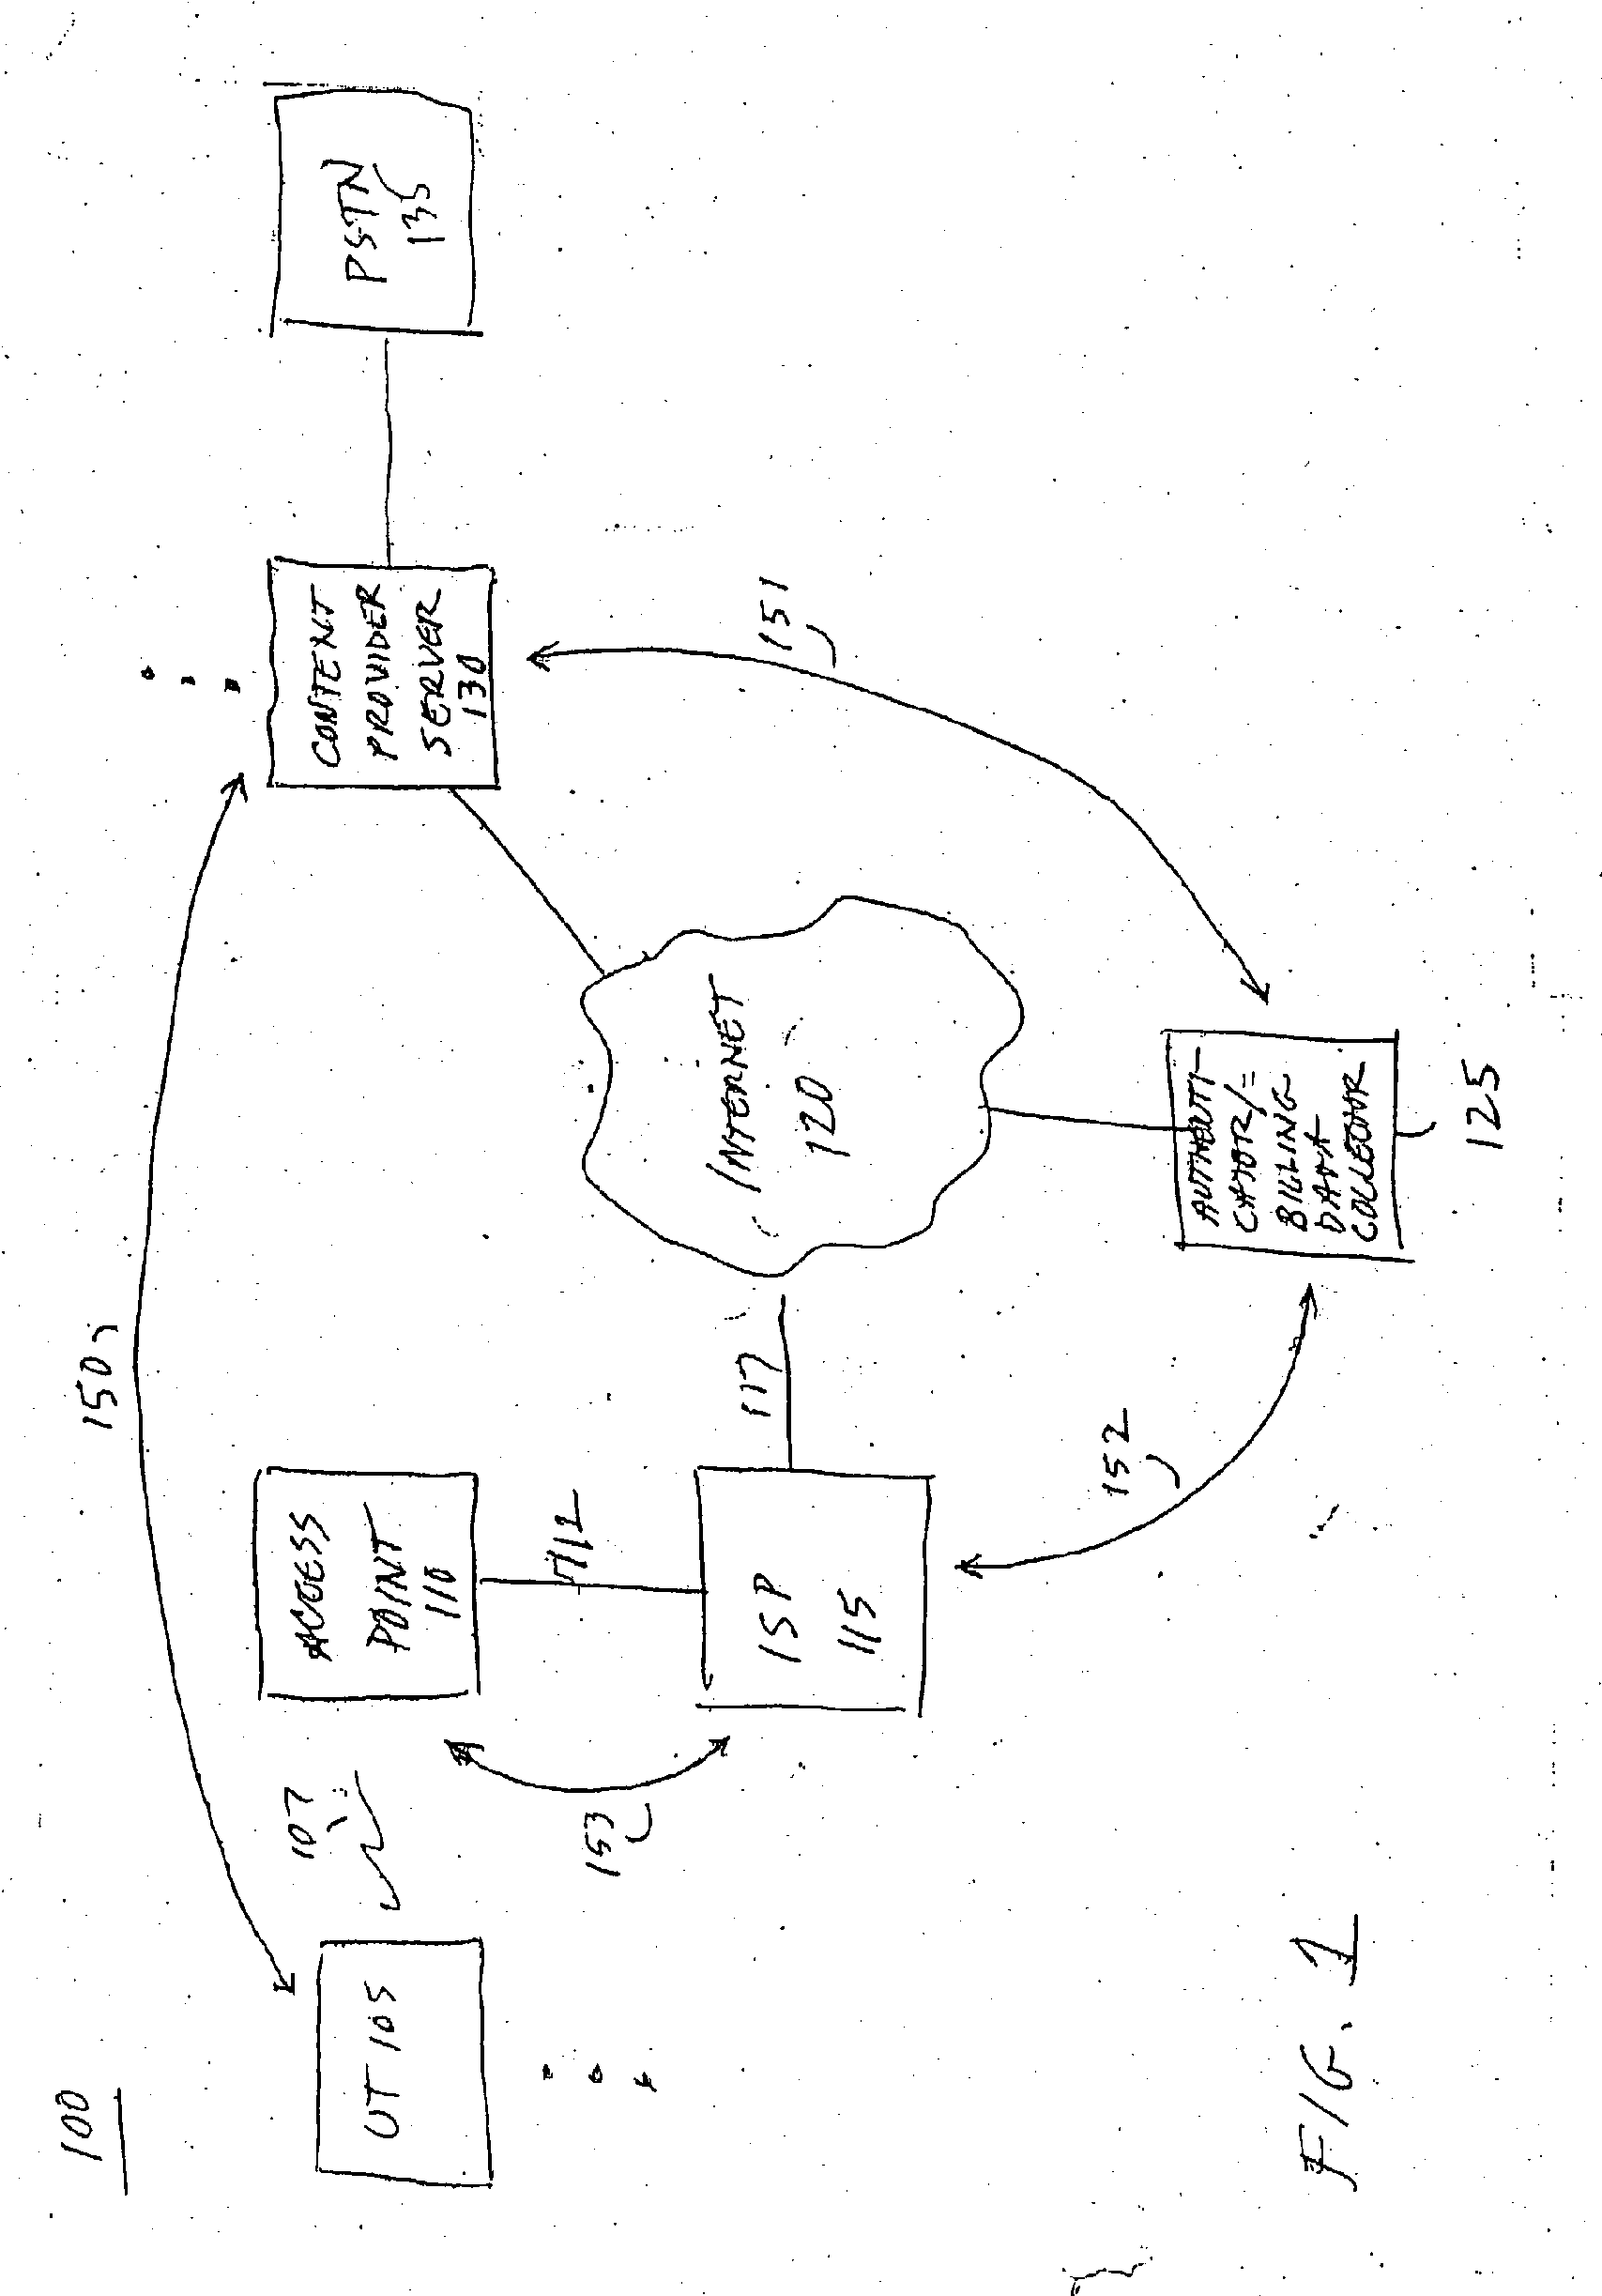 System for on-demand access to local area networks